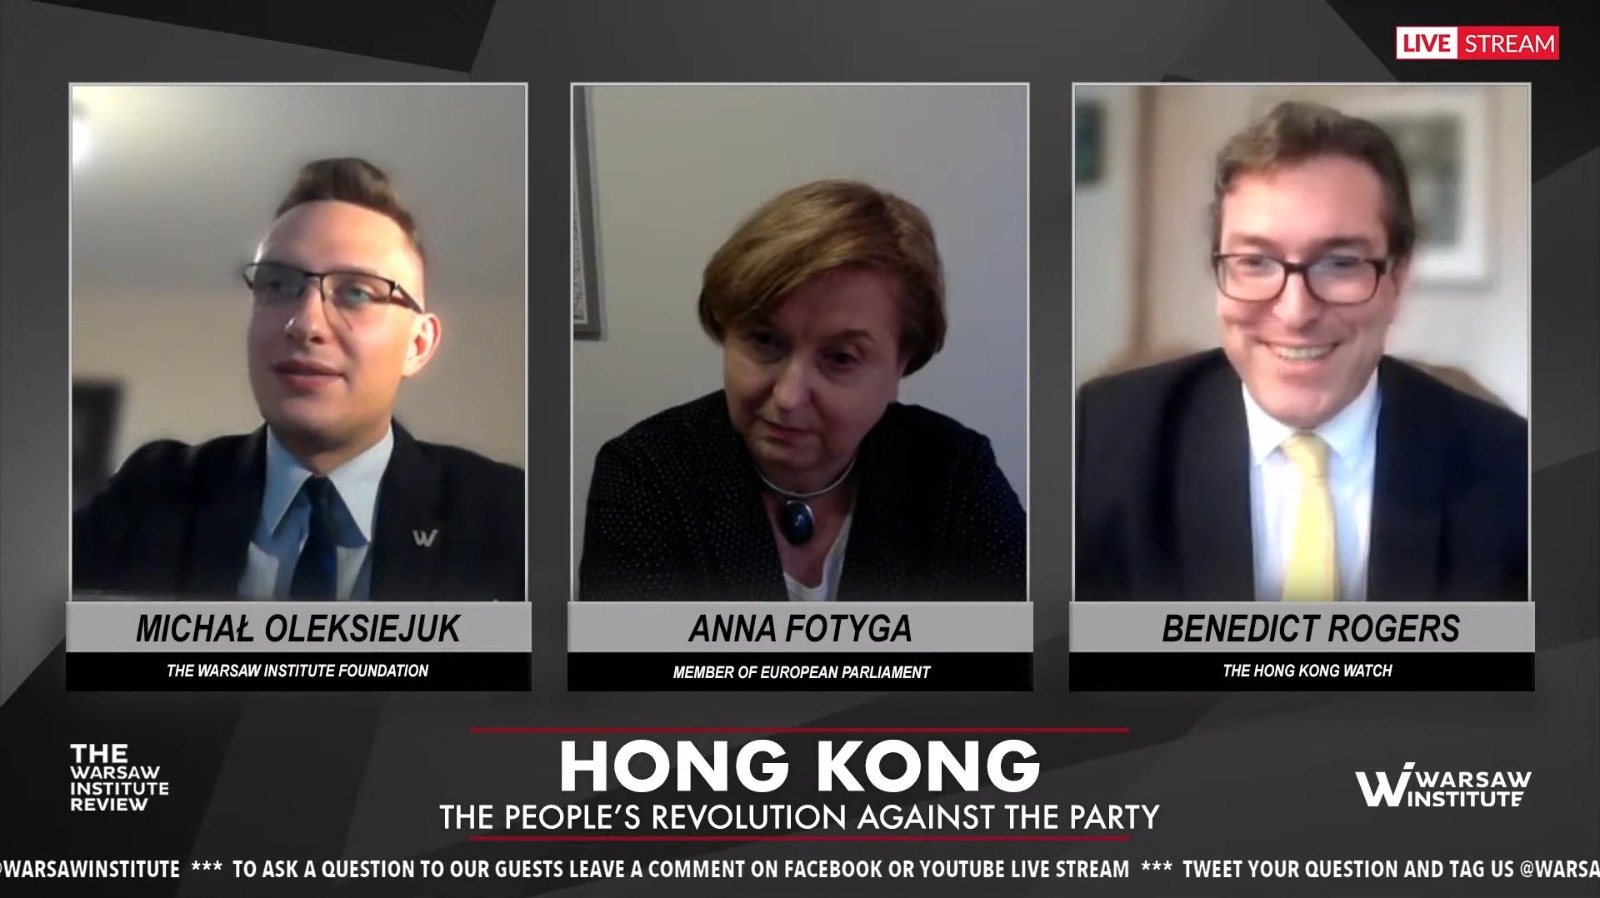 Hong Kong – the people’s revolution against the Party